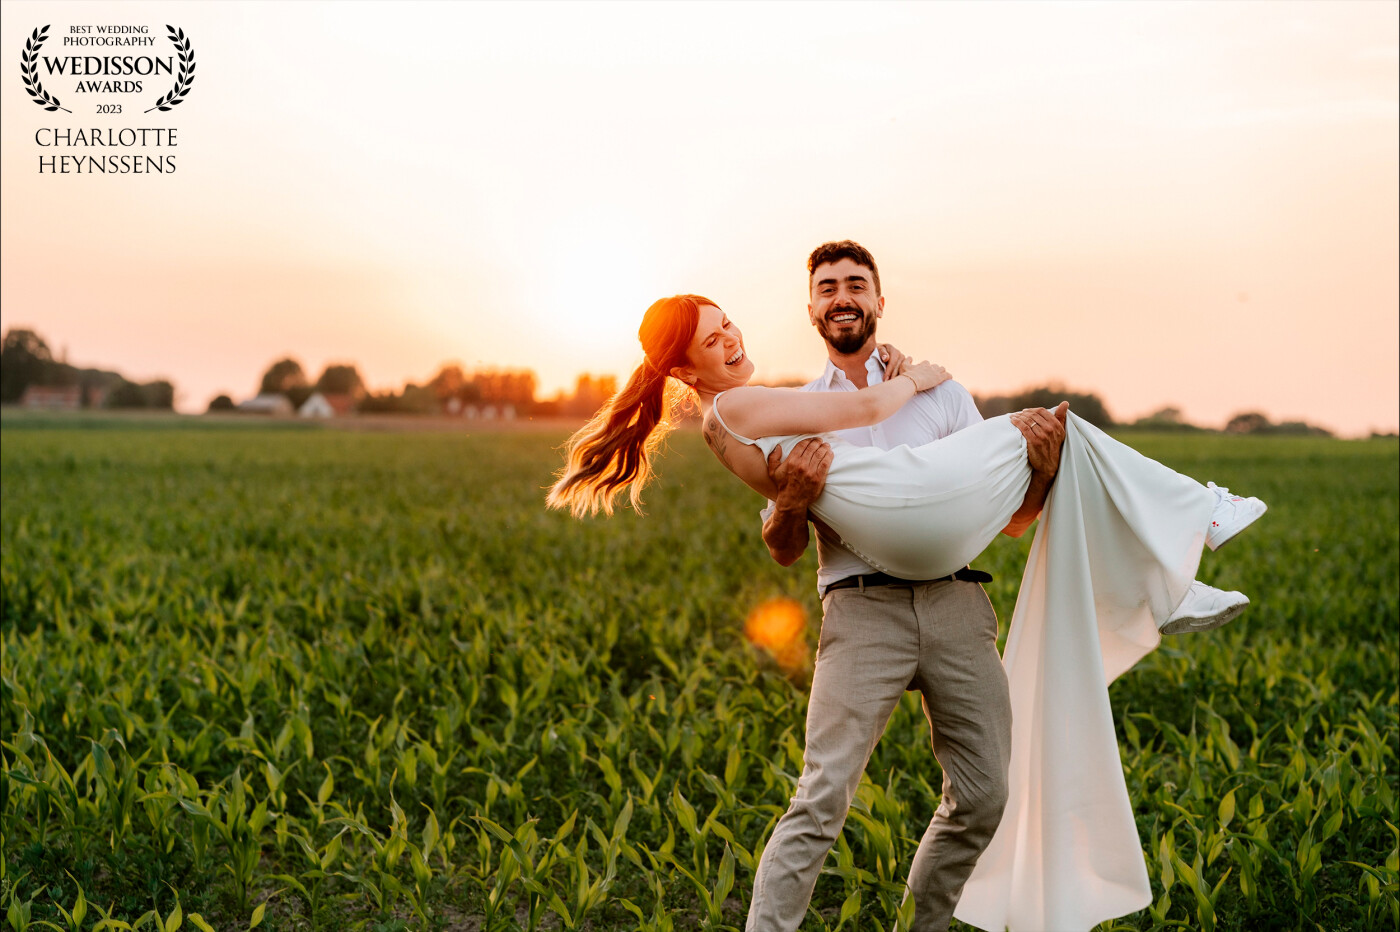 It was 30 degrees Celsius that day, with harsh sunlight everywhere. No ideal circumstances for photographing. However, I knew there would be a gorgeous golden hour that night. So I took the couple away from their party for about 10 minutes to sneak a few pics in a nearby field. It quickly became one of my favorite moments from that day!